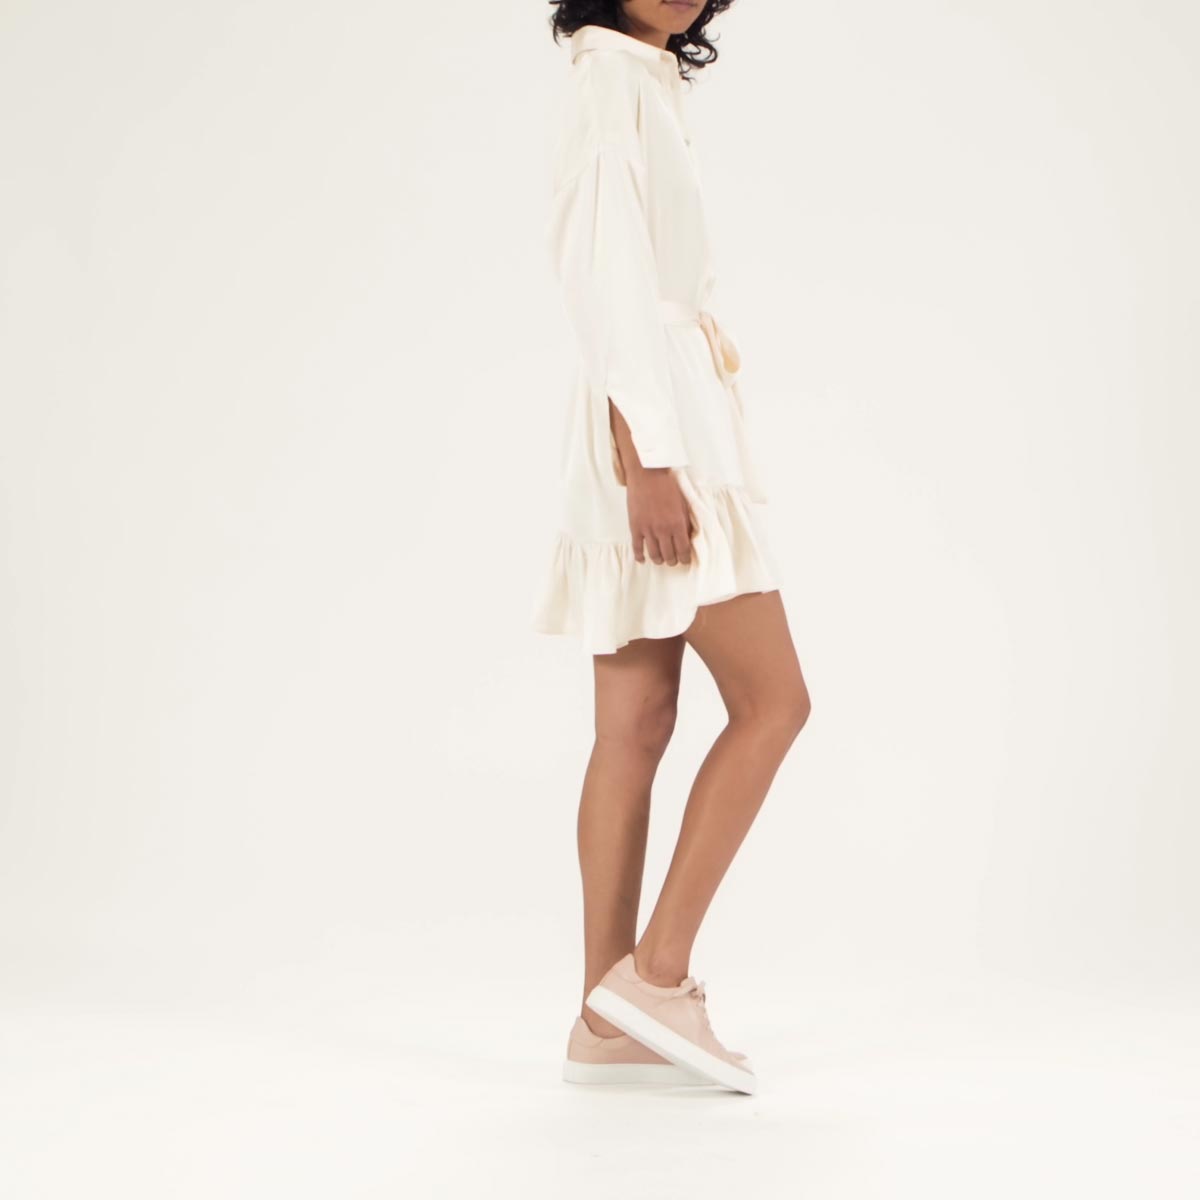 The Sneaker in Rose Calf shown on model styled with a white ruffle hem shirt dress.